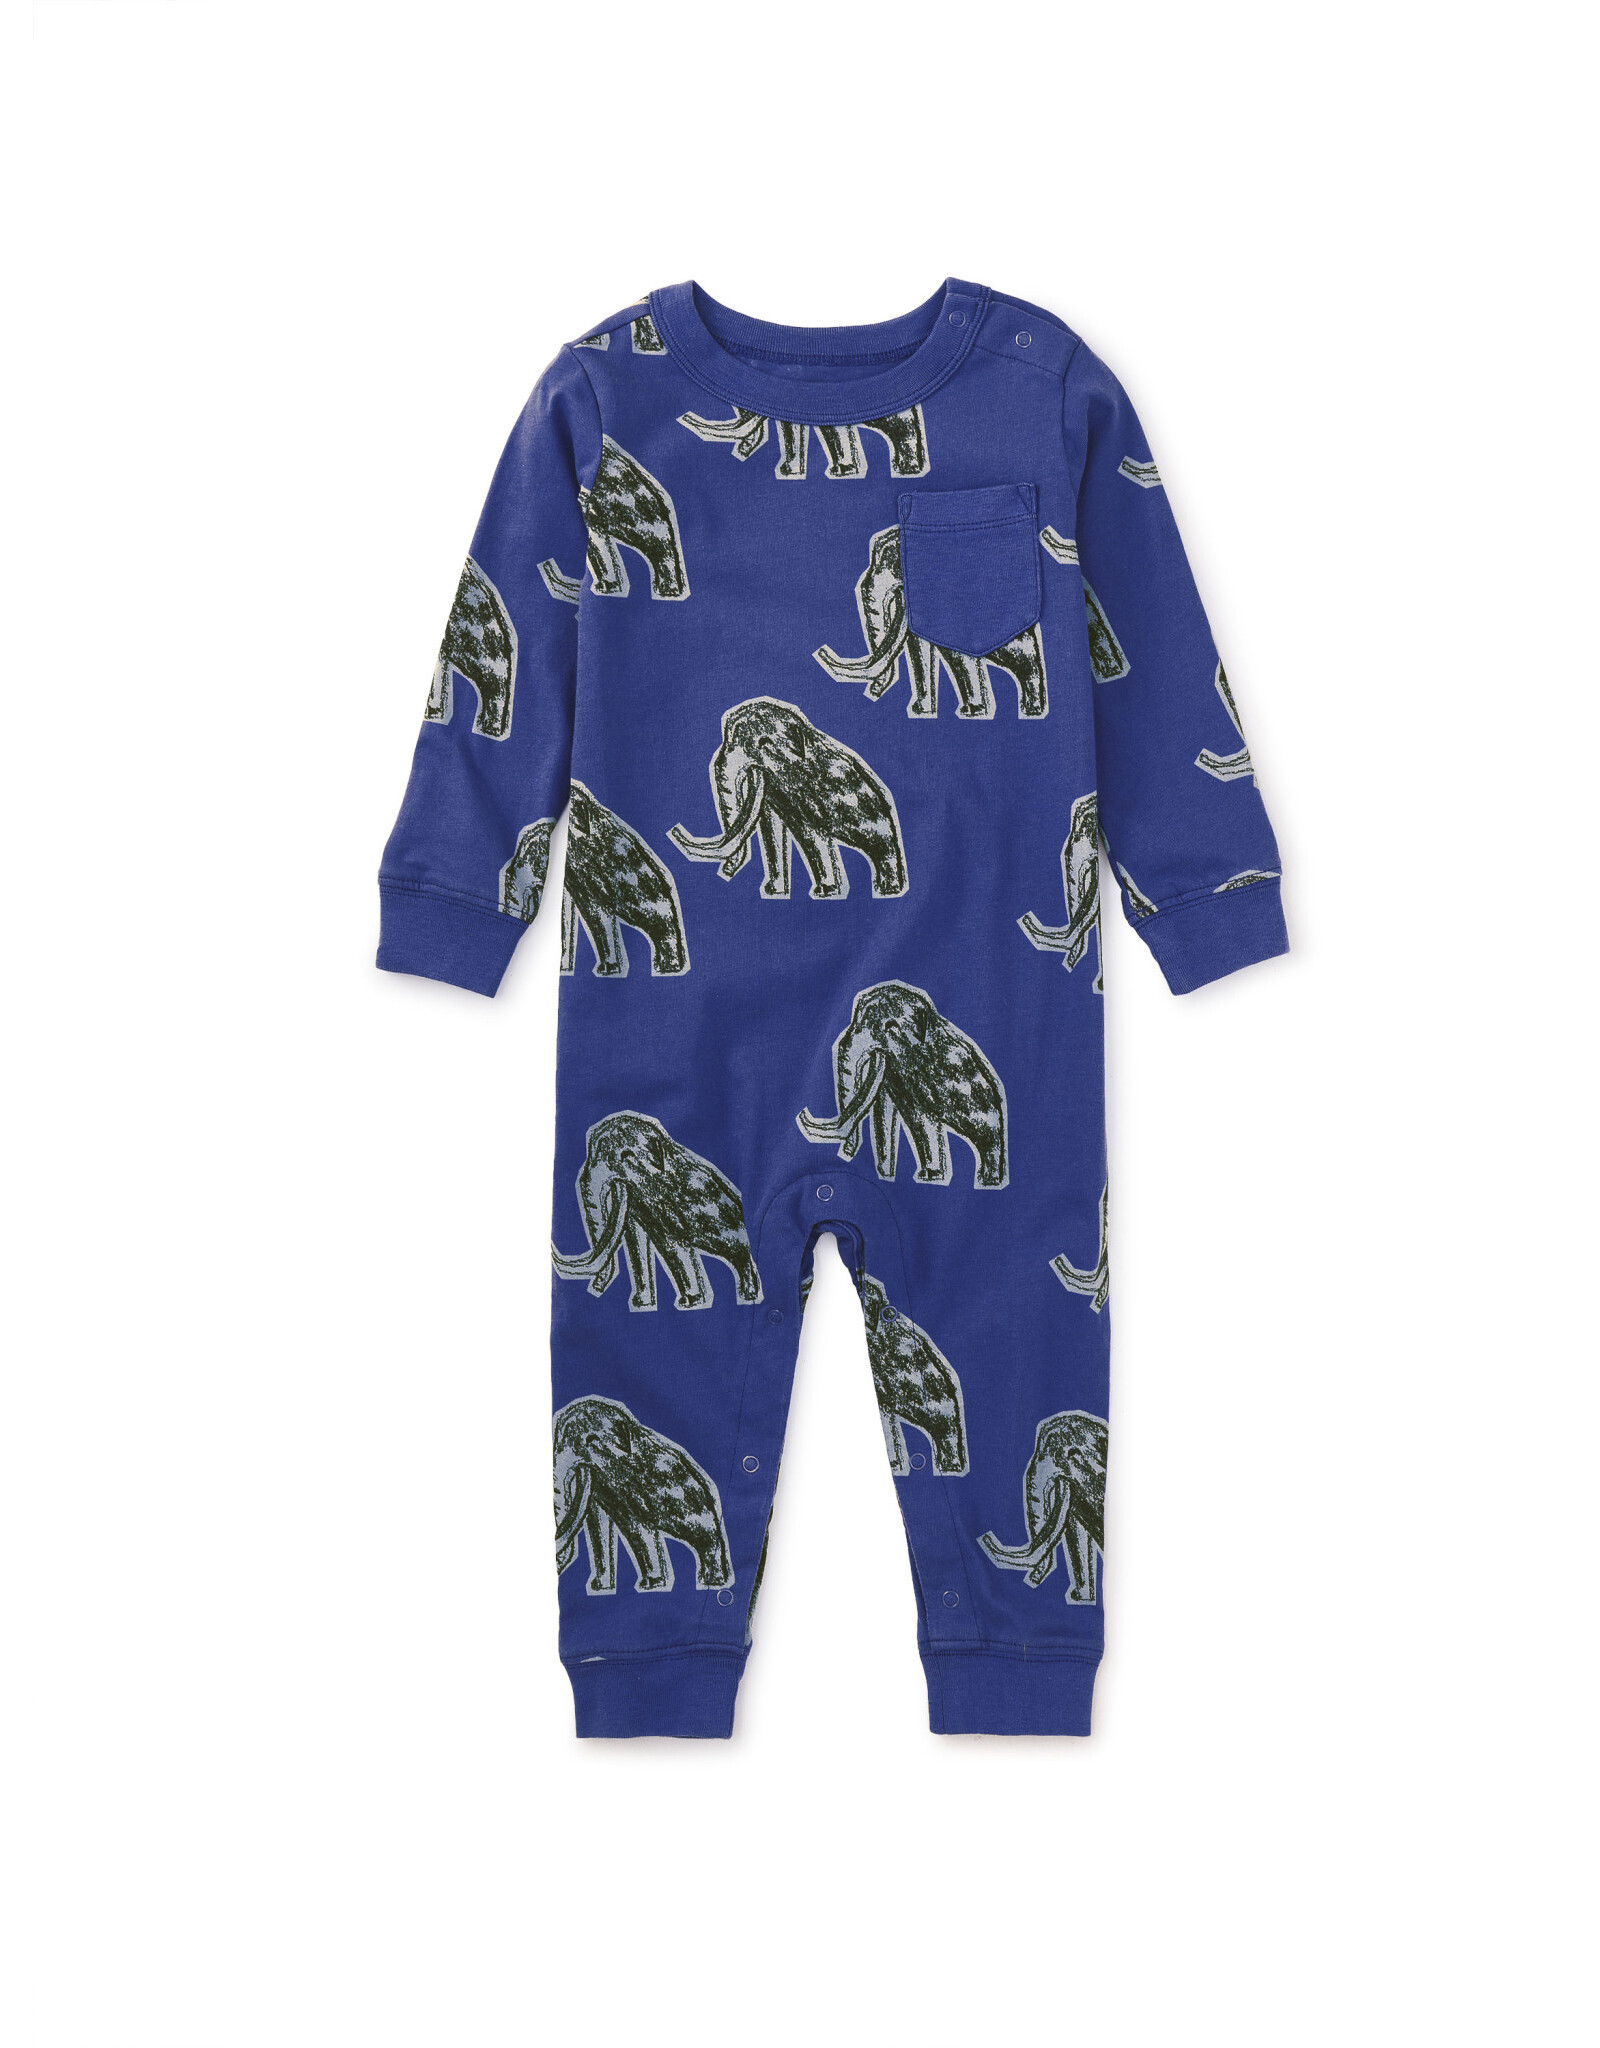 Tea Collection Long Sleeve Pocket Baby Romper~Wooly Mammoth Stamp